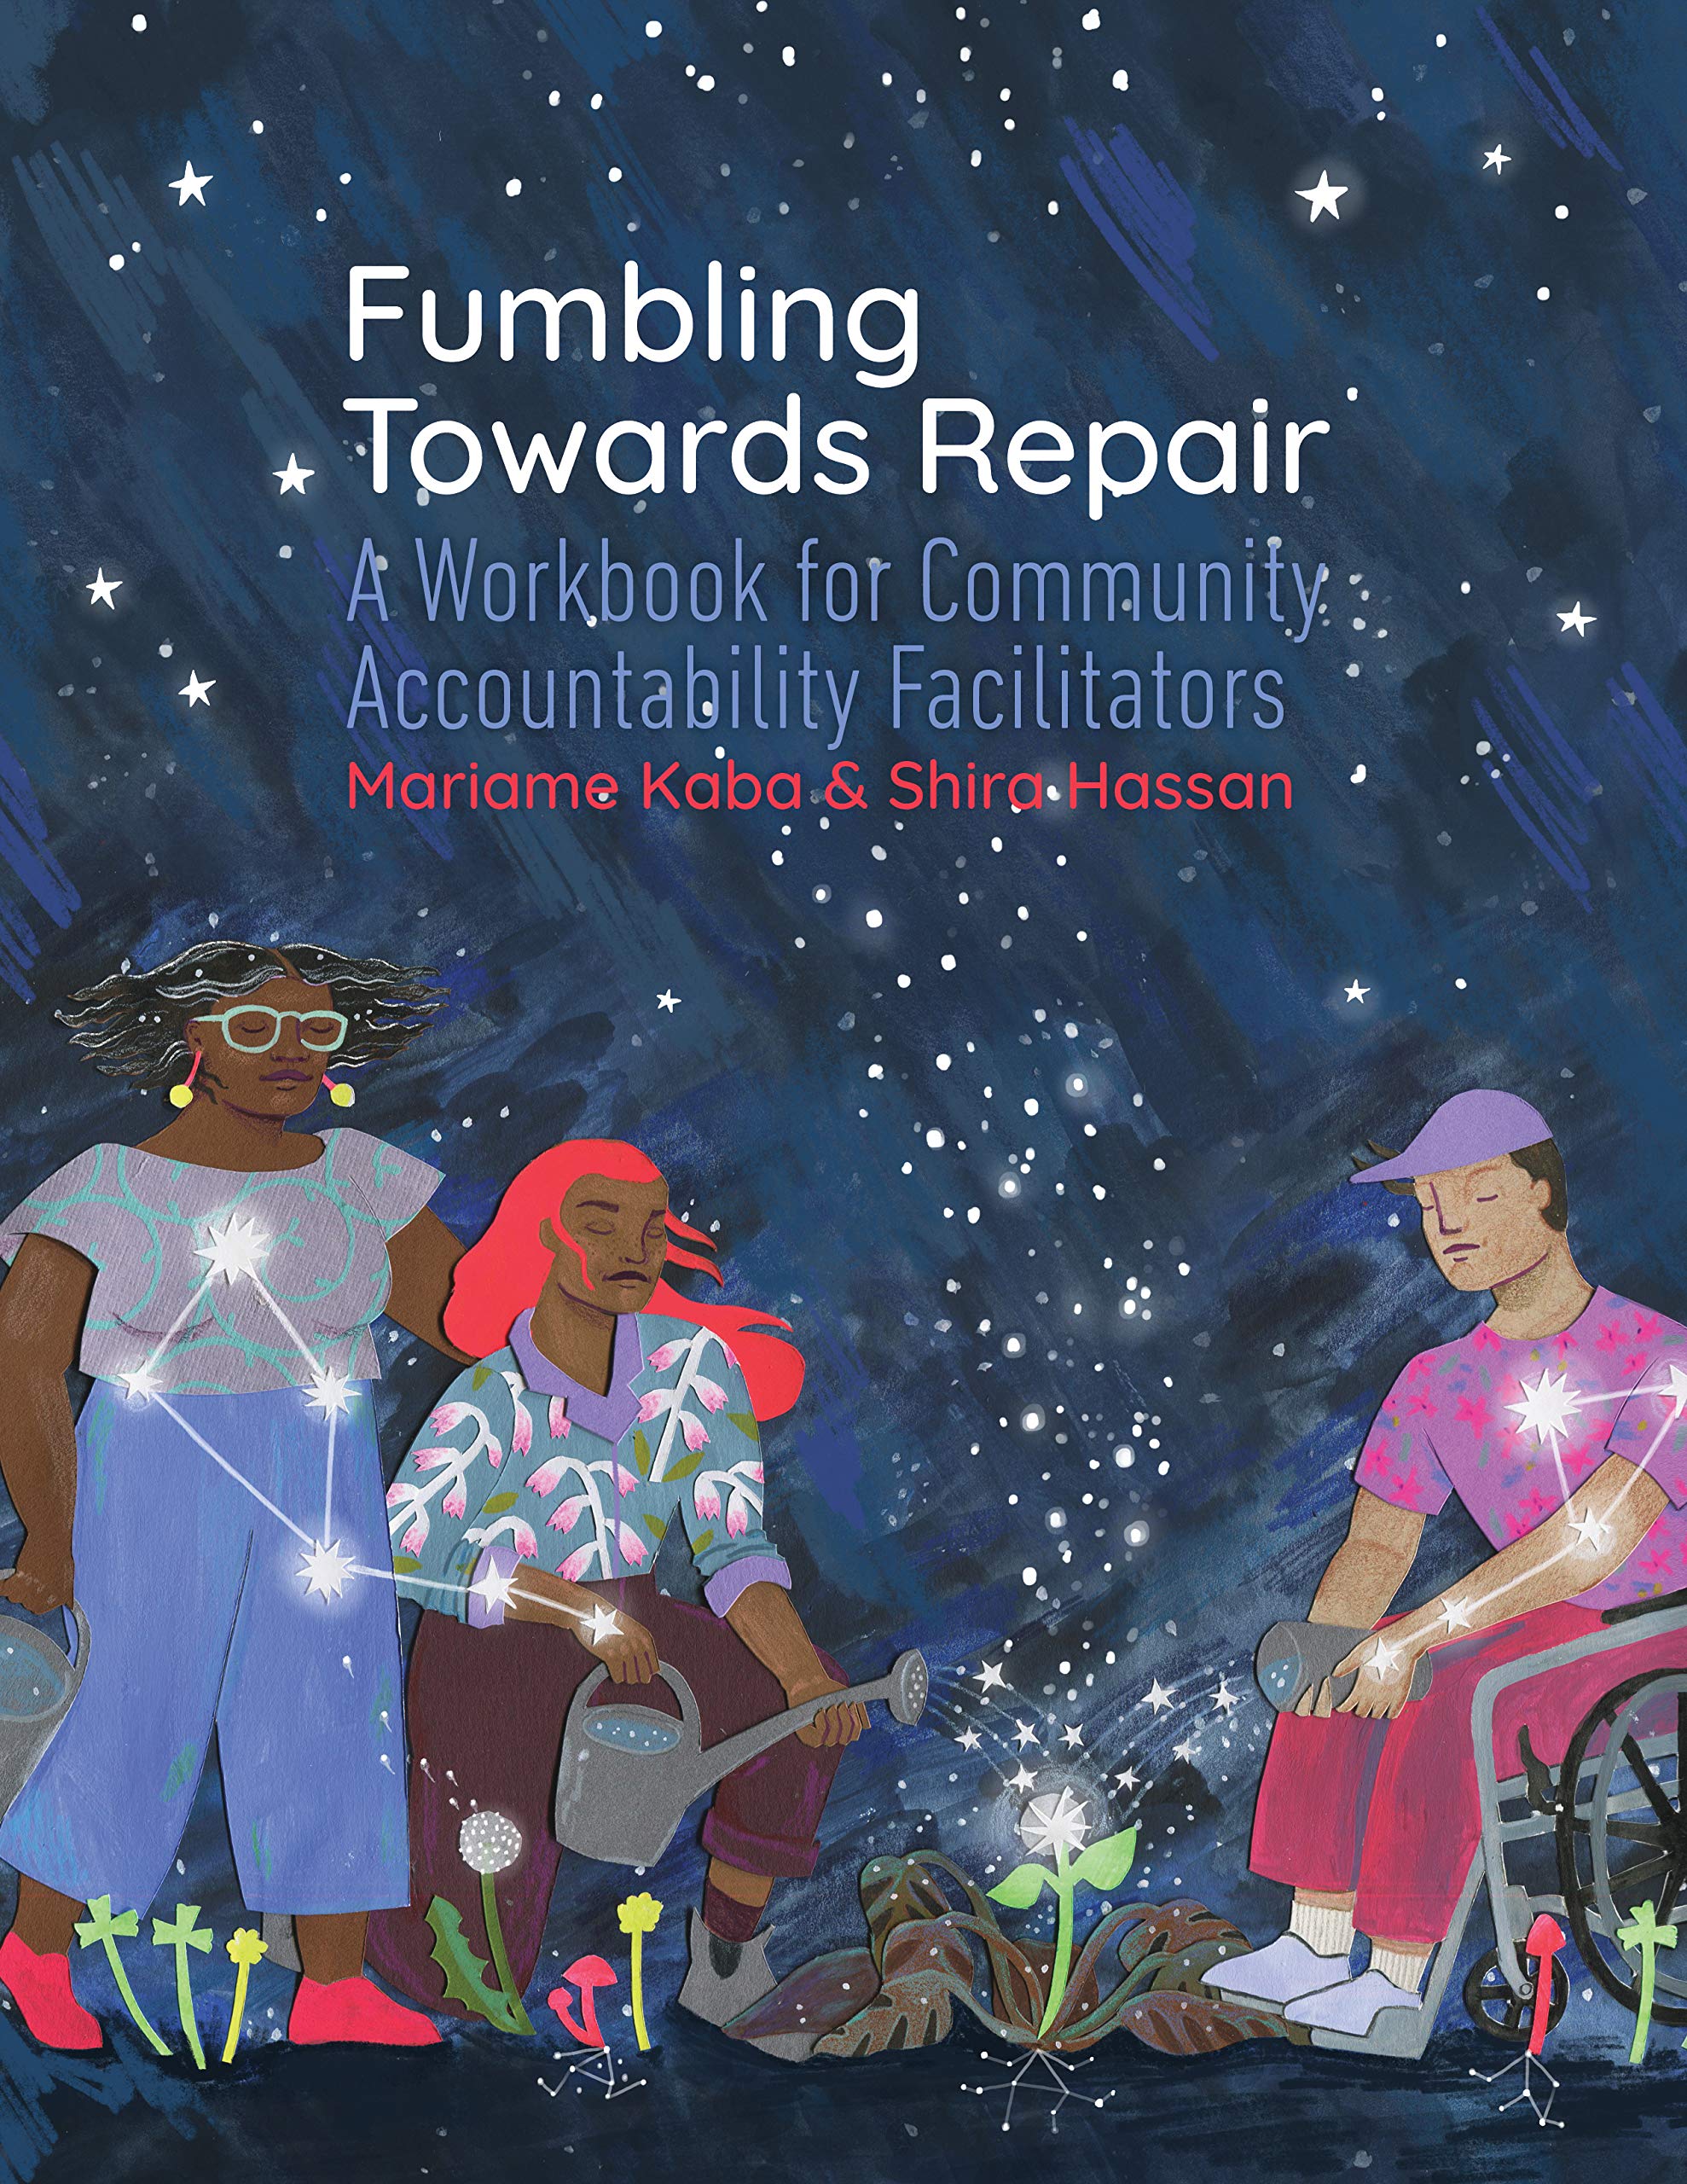 Blue book cover with illustrated starry sky and three people tending to a garden and title Fumbling Towards Repair A Workbook for Community Accountability Facilitators